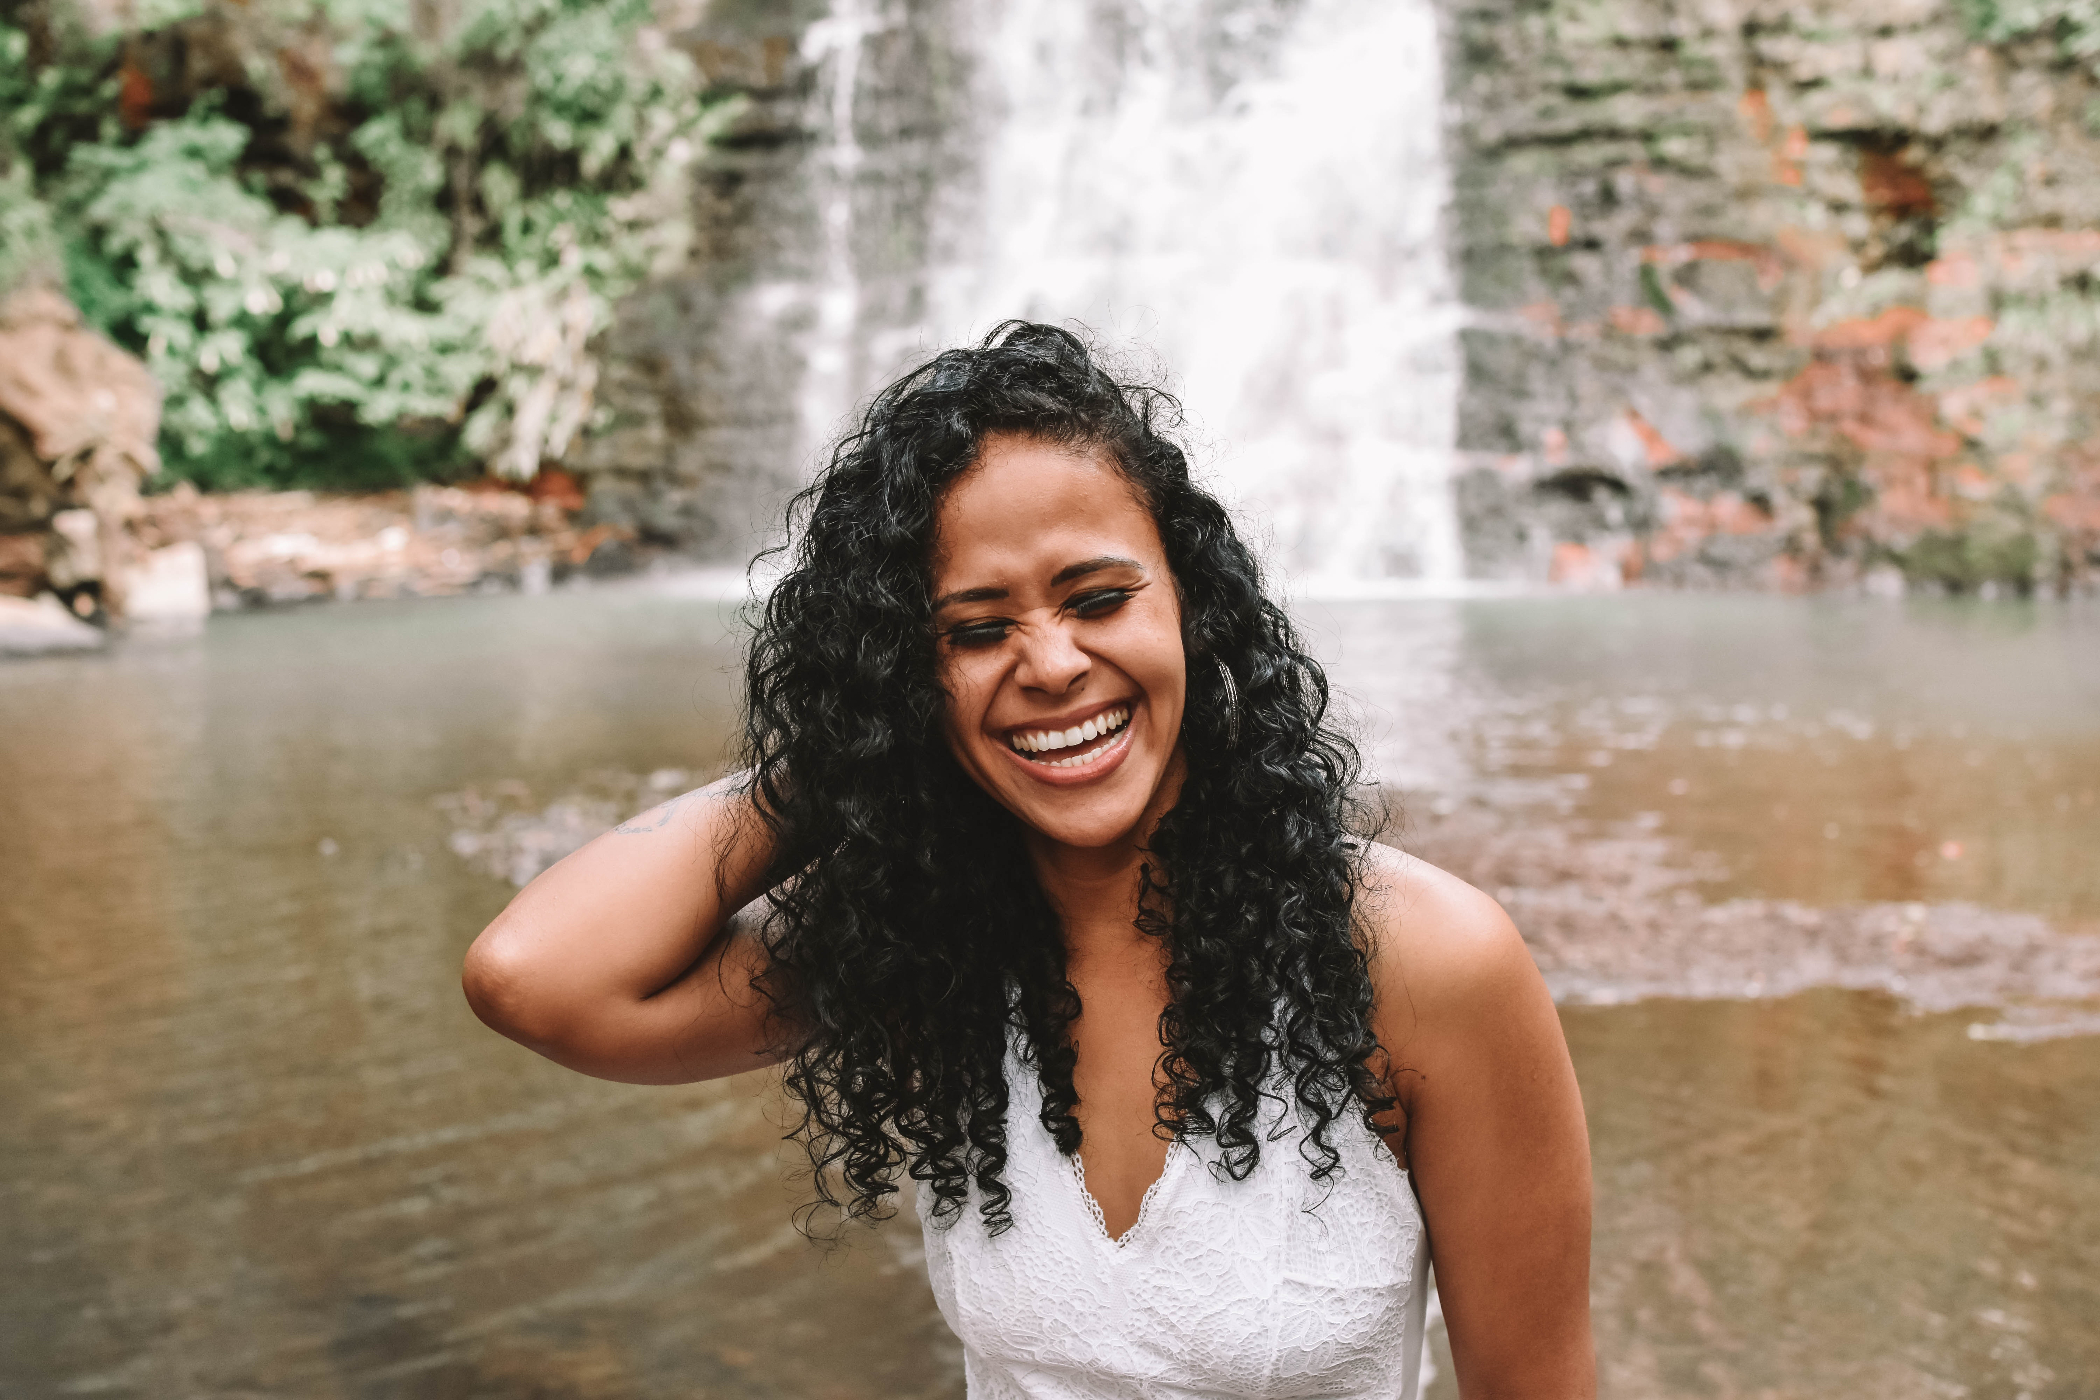 Woman laughing in front of a waterfall. | Source: Pexels